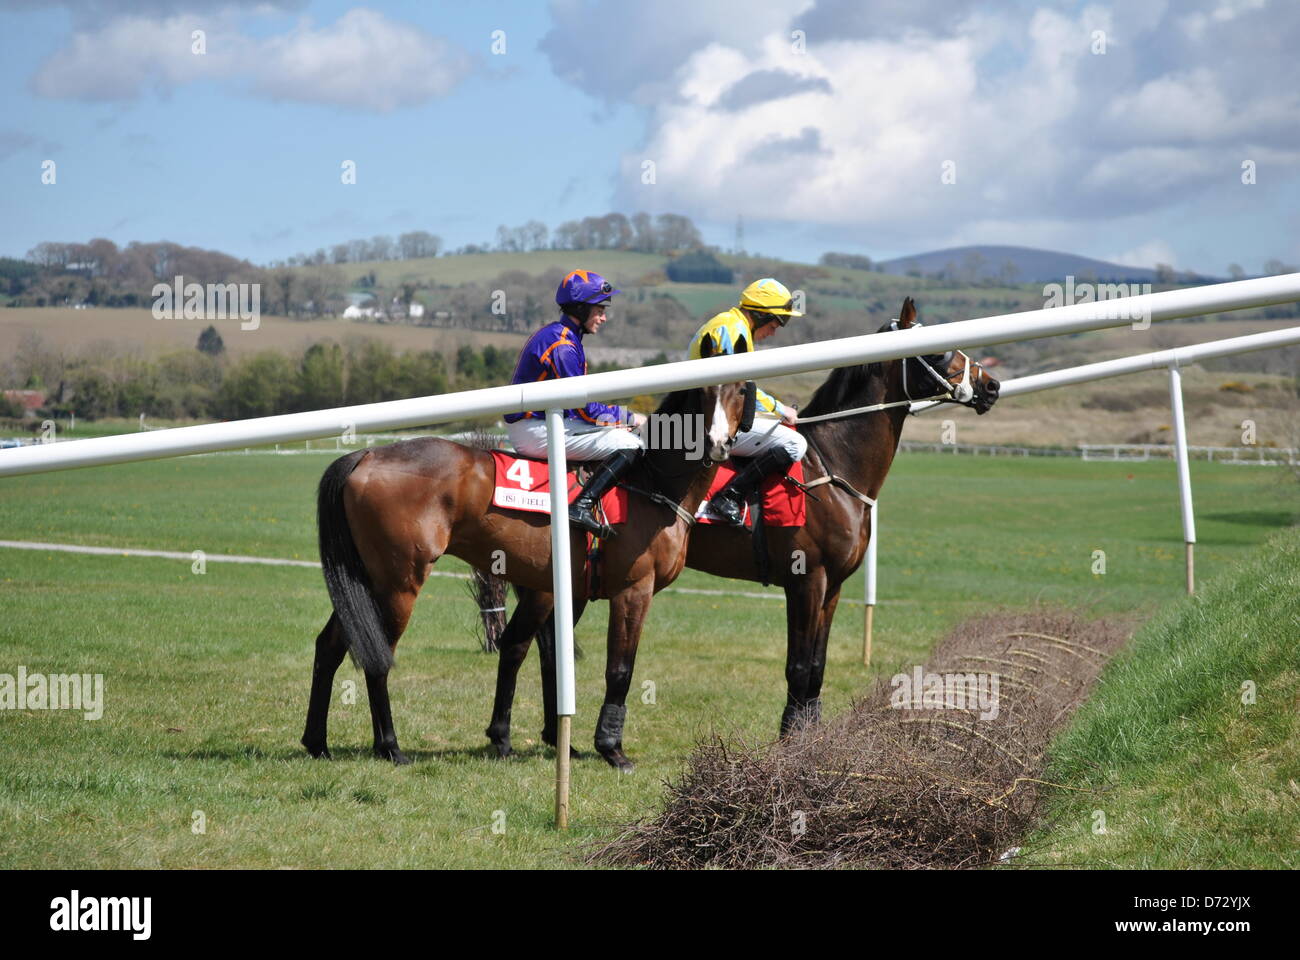 punchestown race course naas co kildare ireland 27th april 2013 horses looking a rubys double jump before the cross country event photo taken by Linda Duncan alamy live news Stock Photo